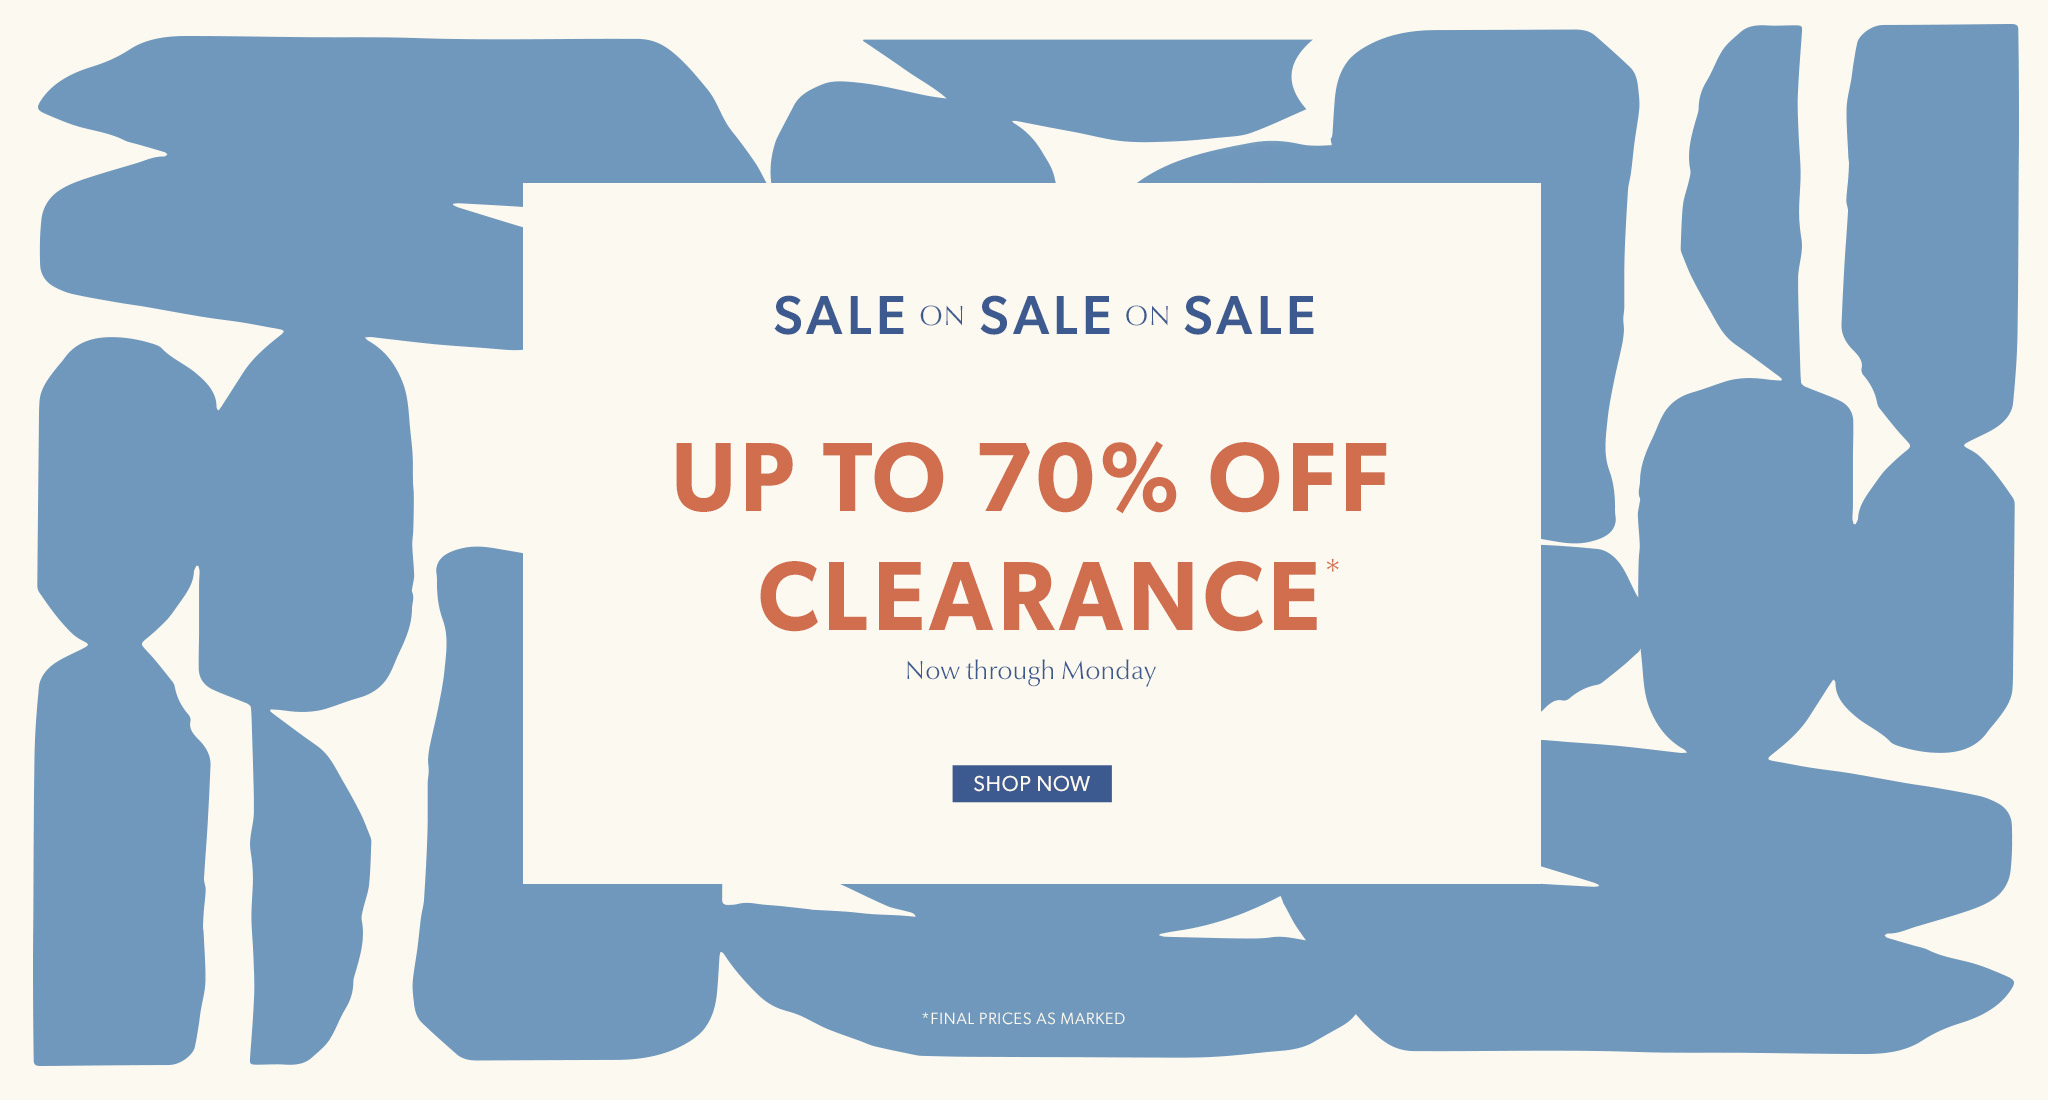 Up to 70% off clearance, Shop Now